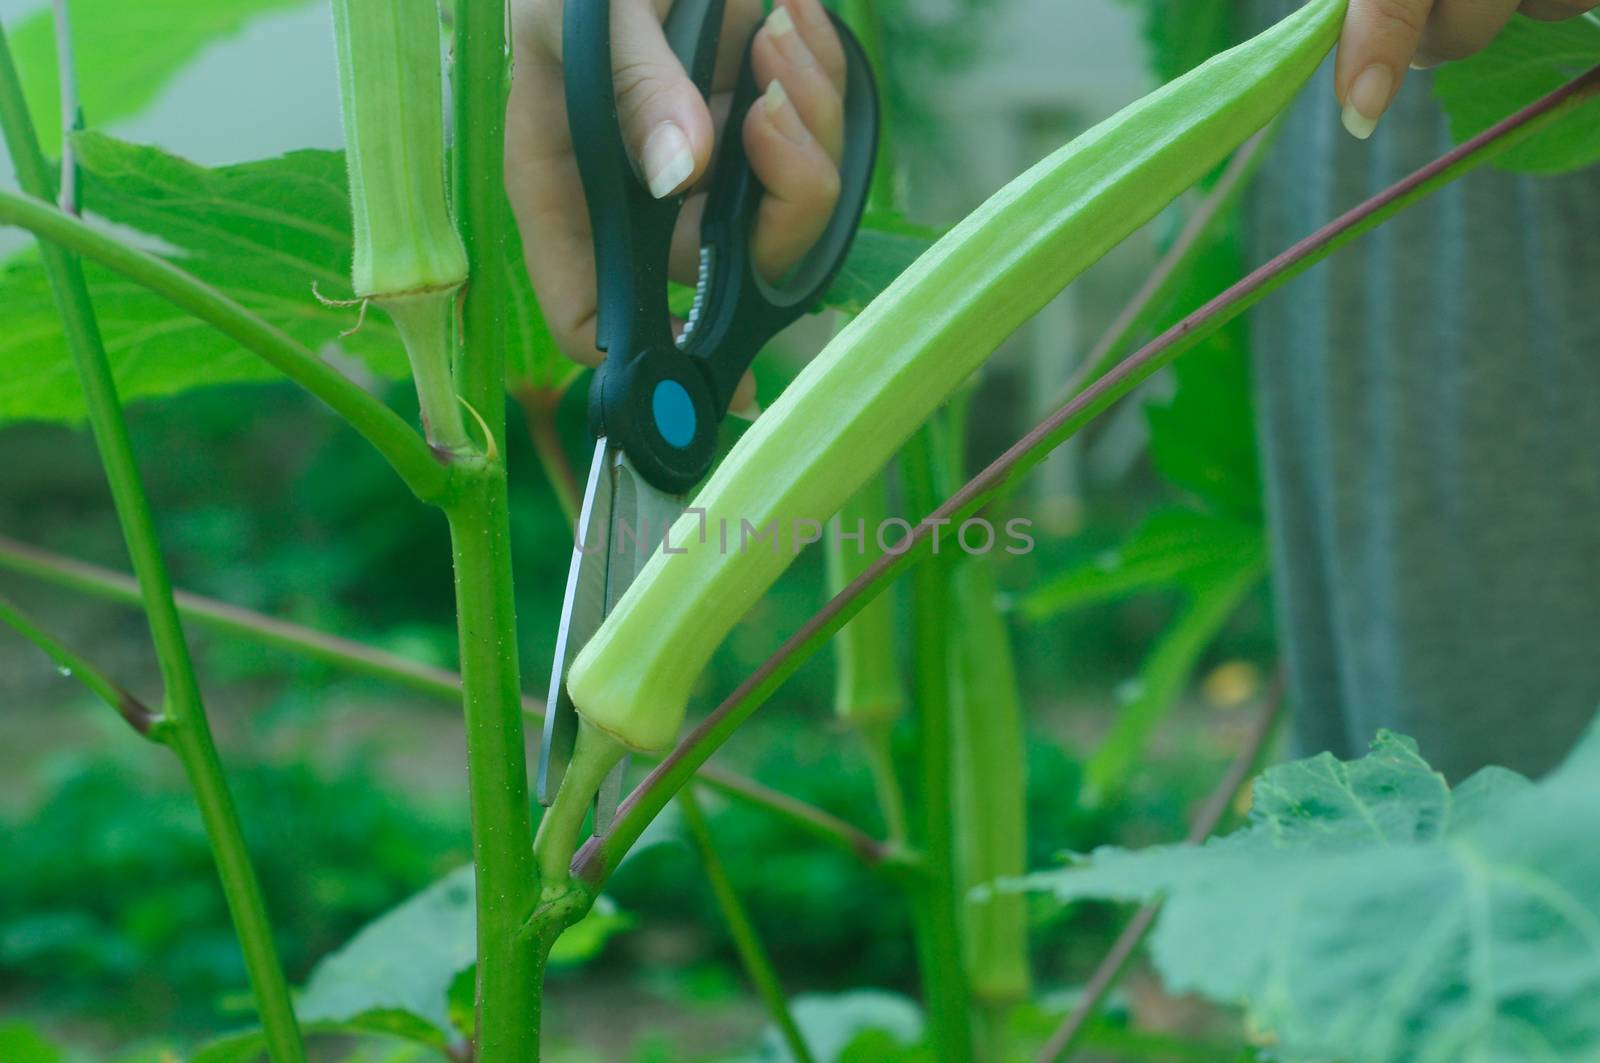 Farmer used a scissor to cut a growing and ripe lady finger in her garden.